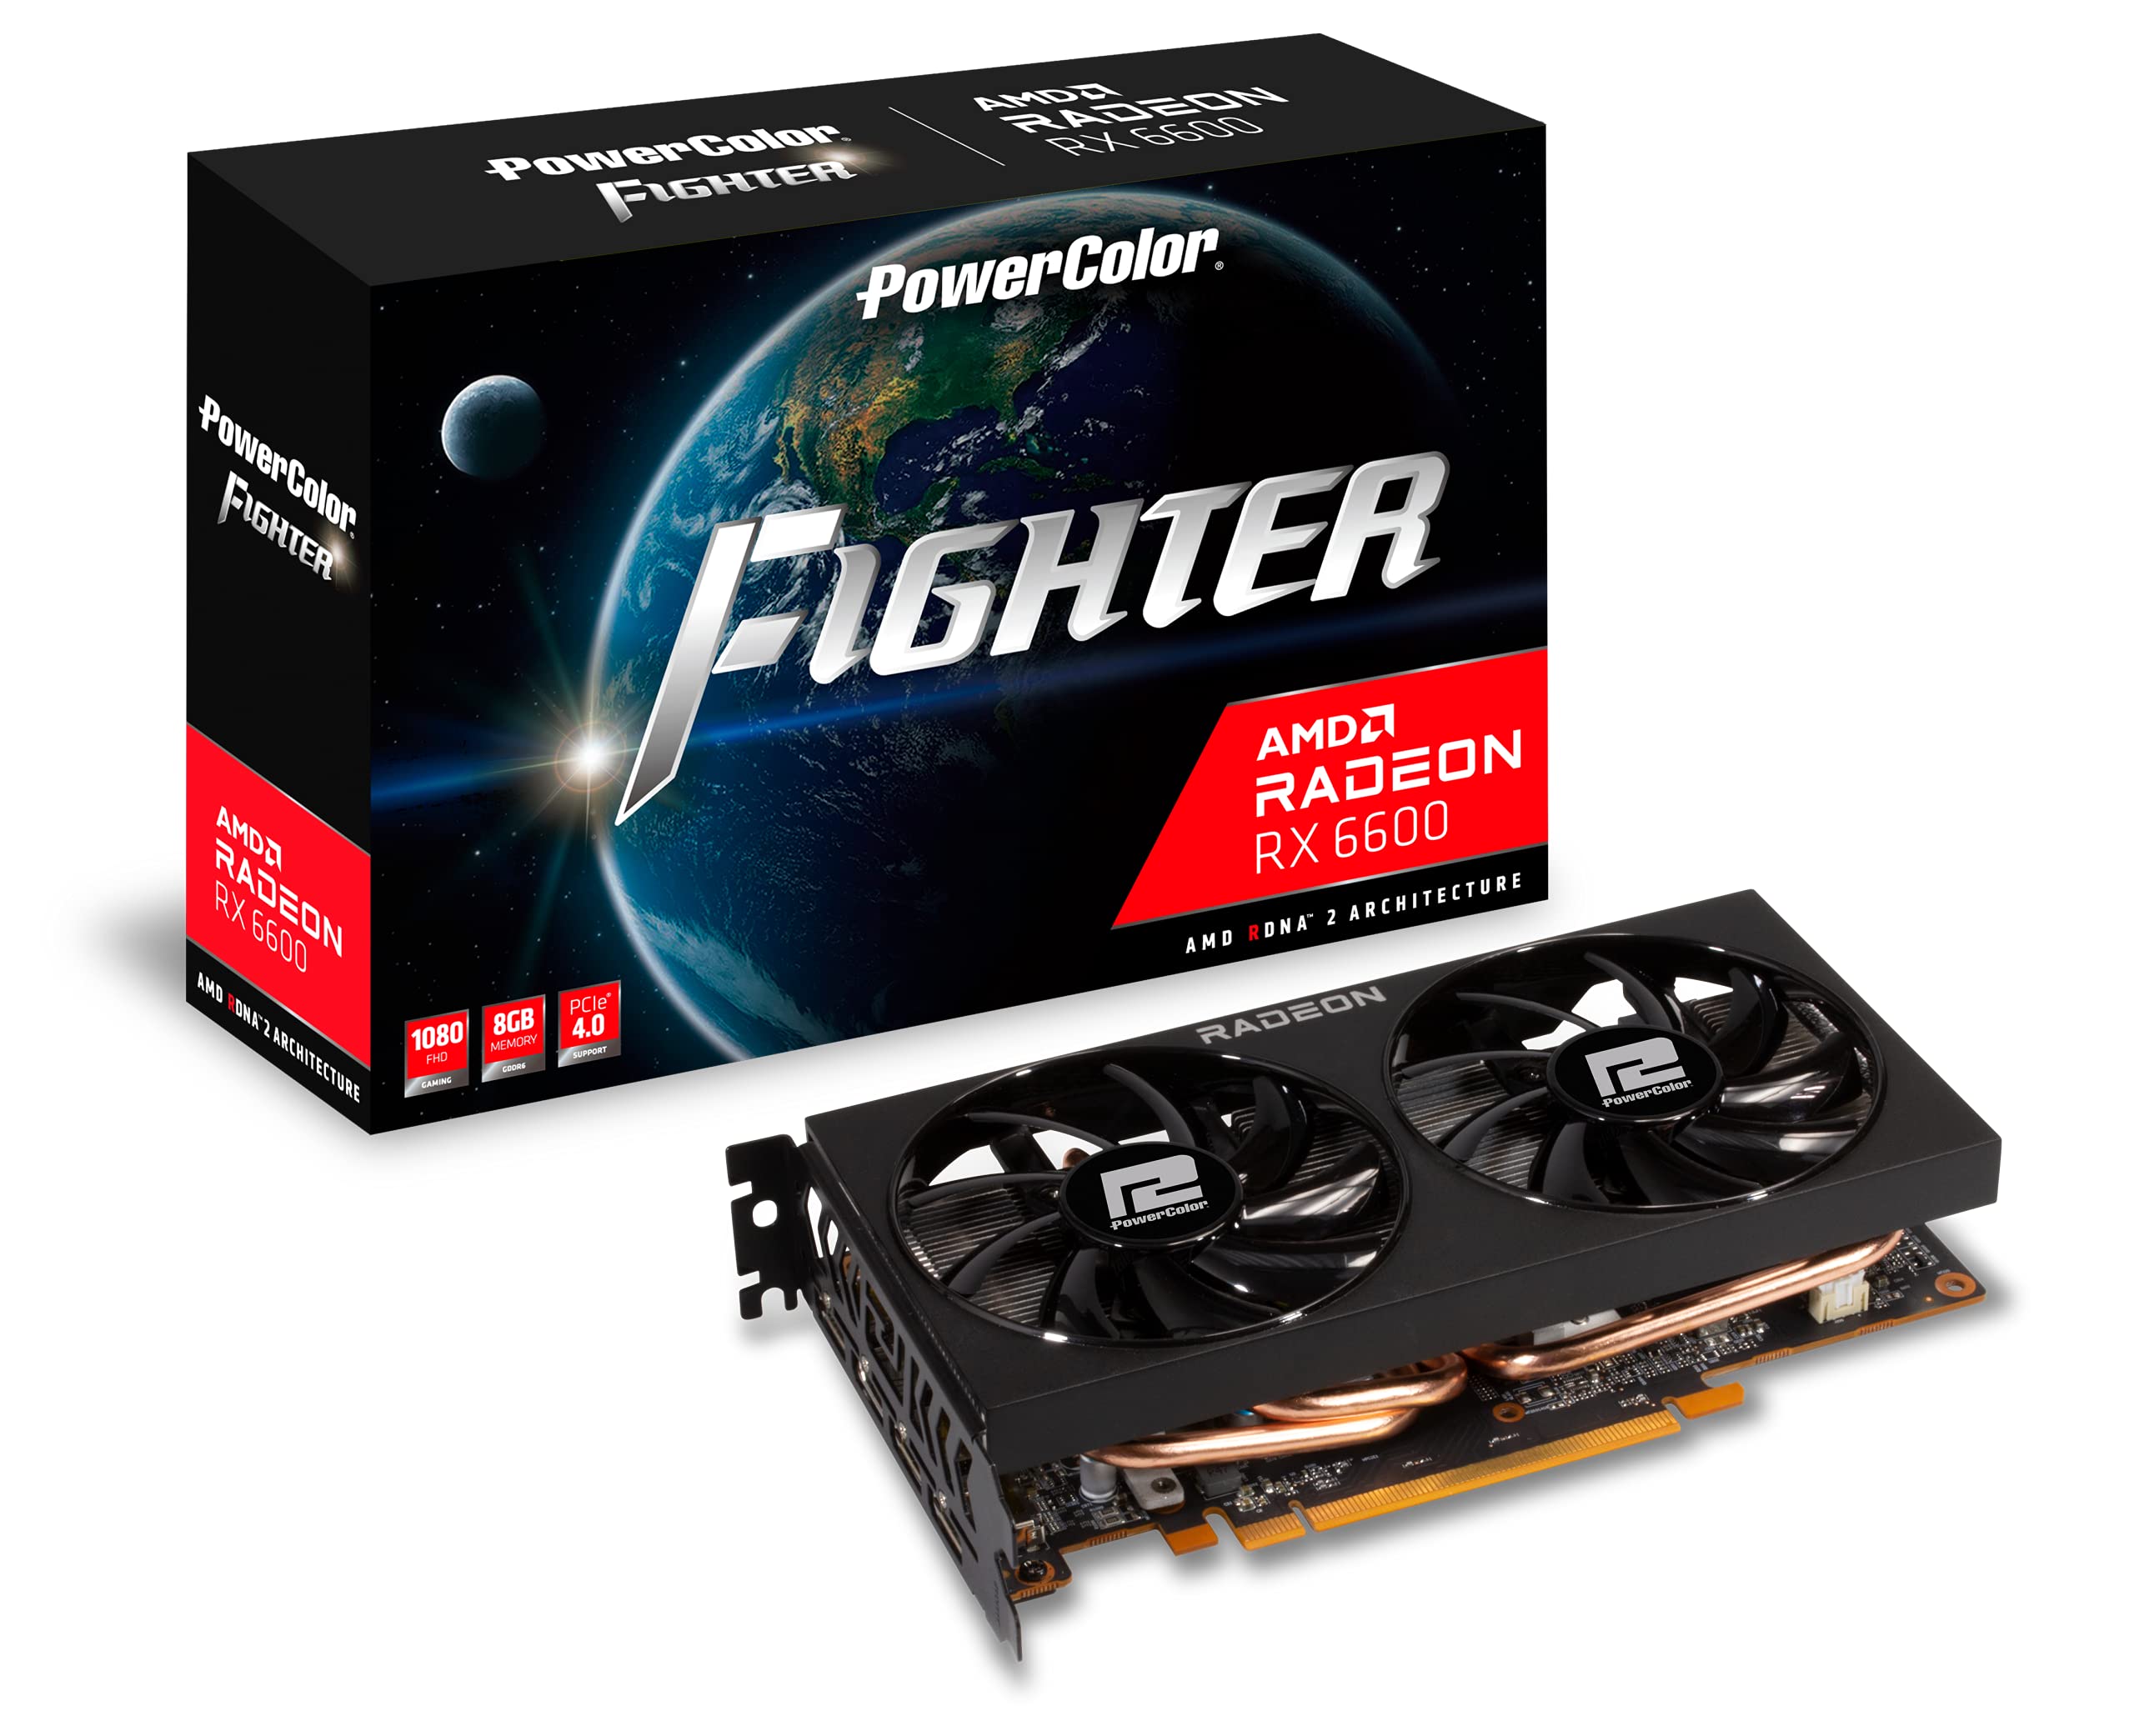 PowerColor Fighter AMD Radeon RX 6600 Graphics Card with 8GB GDDR6 Memory $200